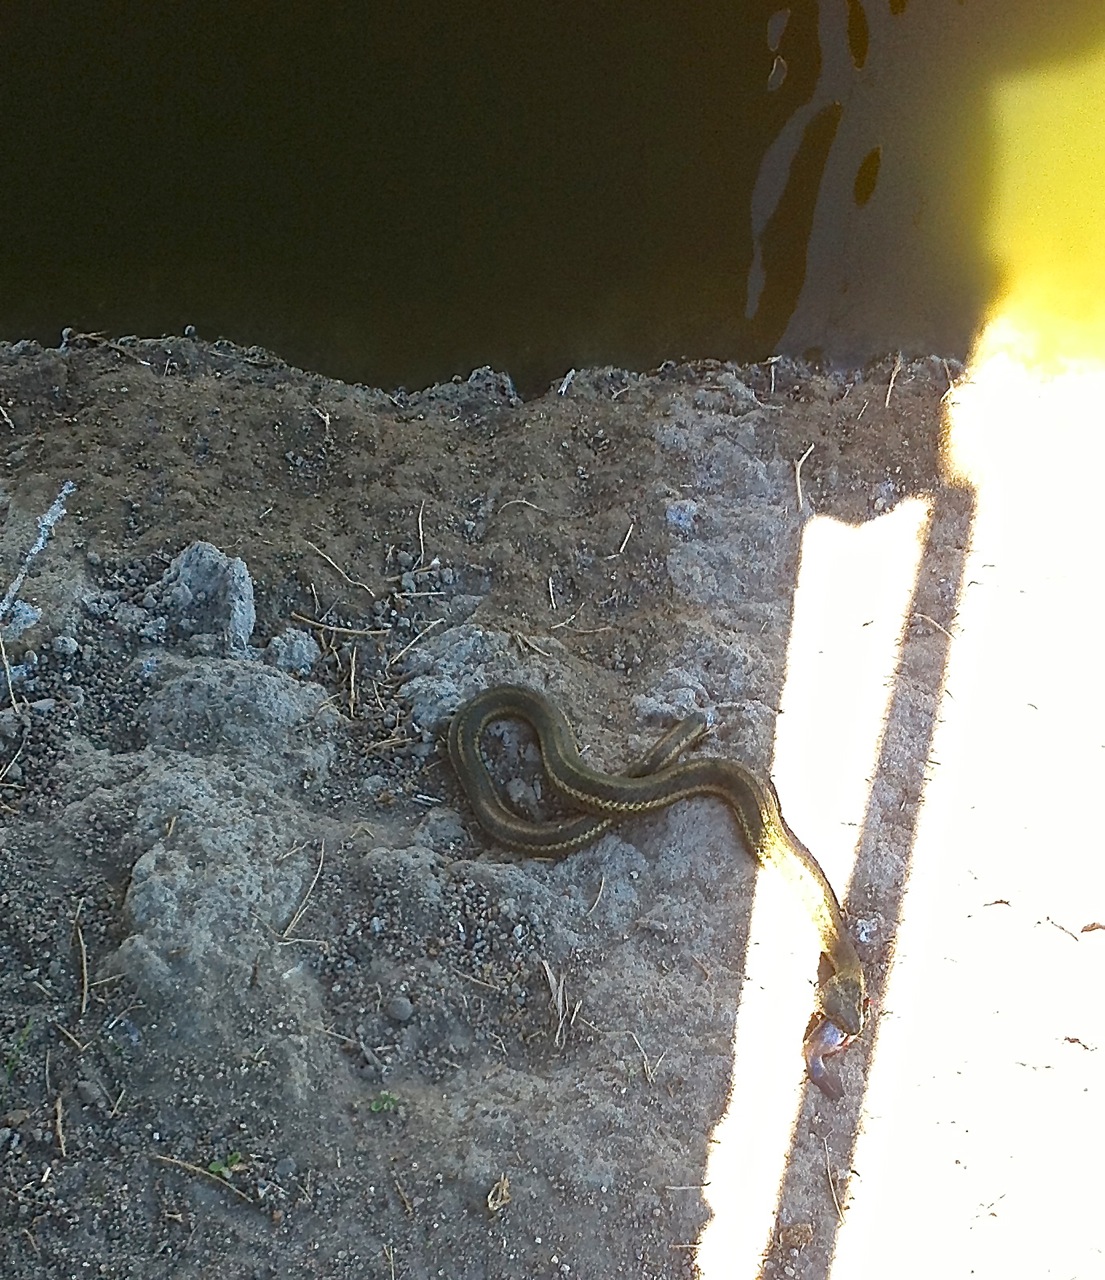 a giant garter snake on the dirt with part of a fish carcass stuck in its mouth